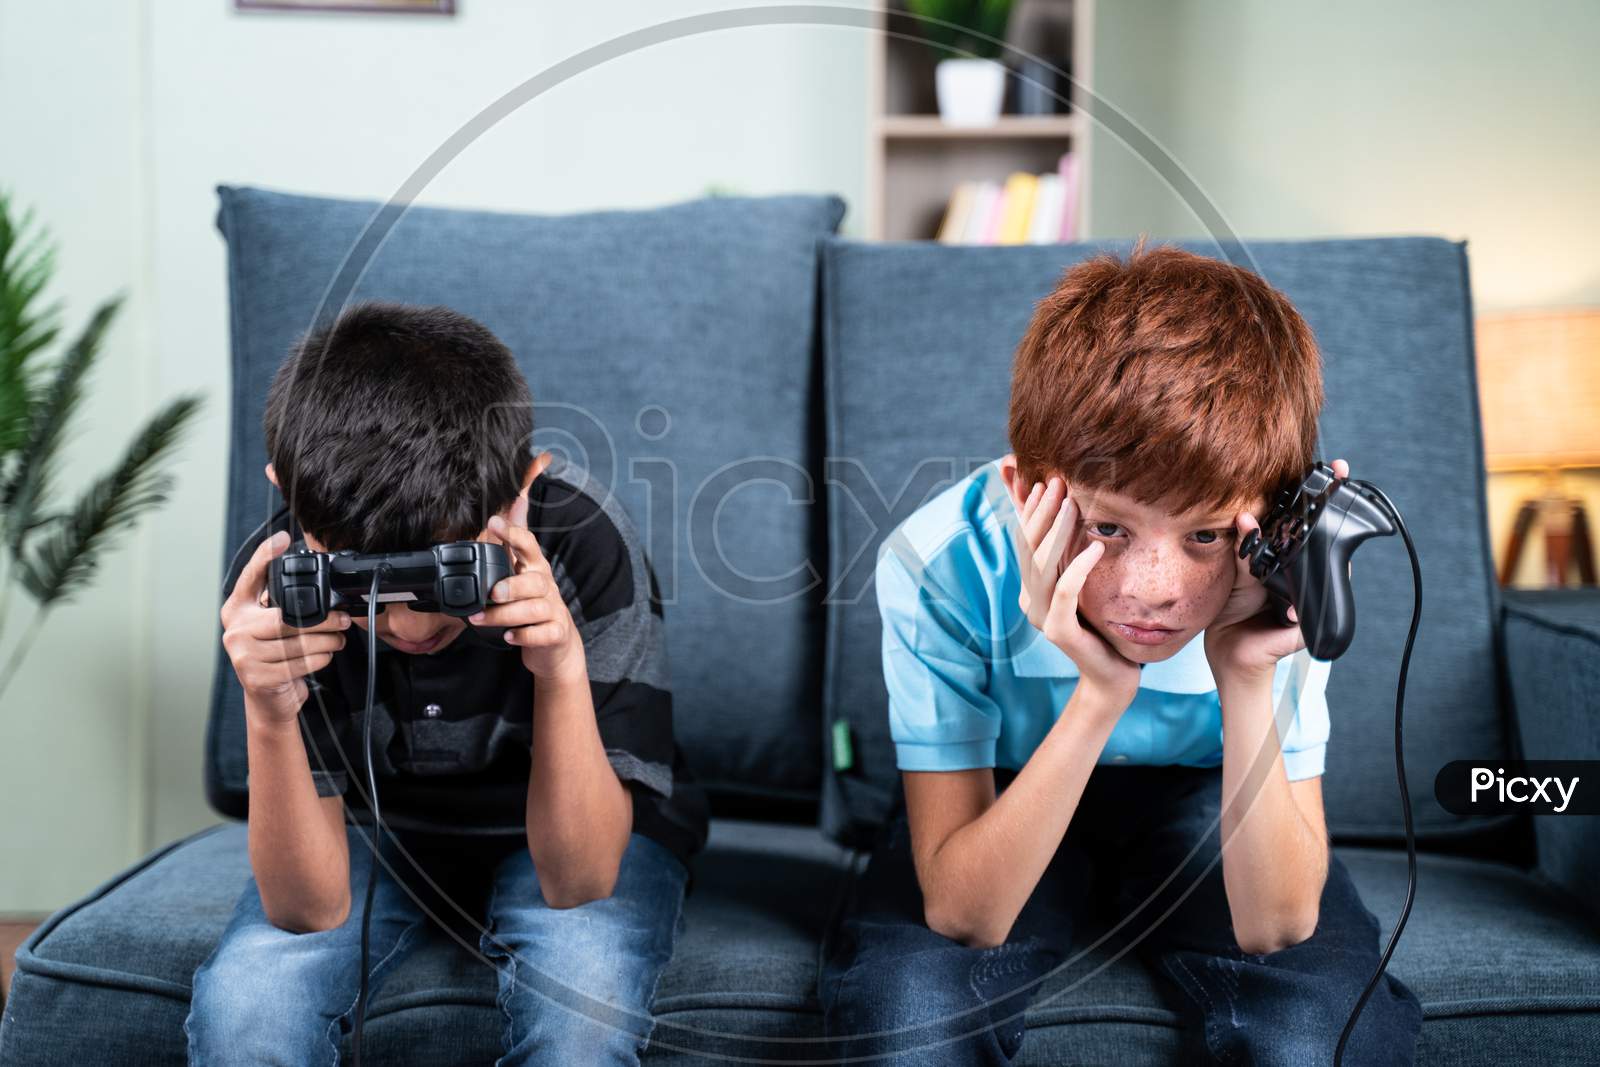 Young Kids Feeling Sad Due To Lost In Videogame While Playing At Home On Sofa - Concept Of Frustration Or Sadness Due To Failure In Game During Childhood.